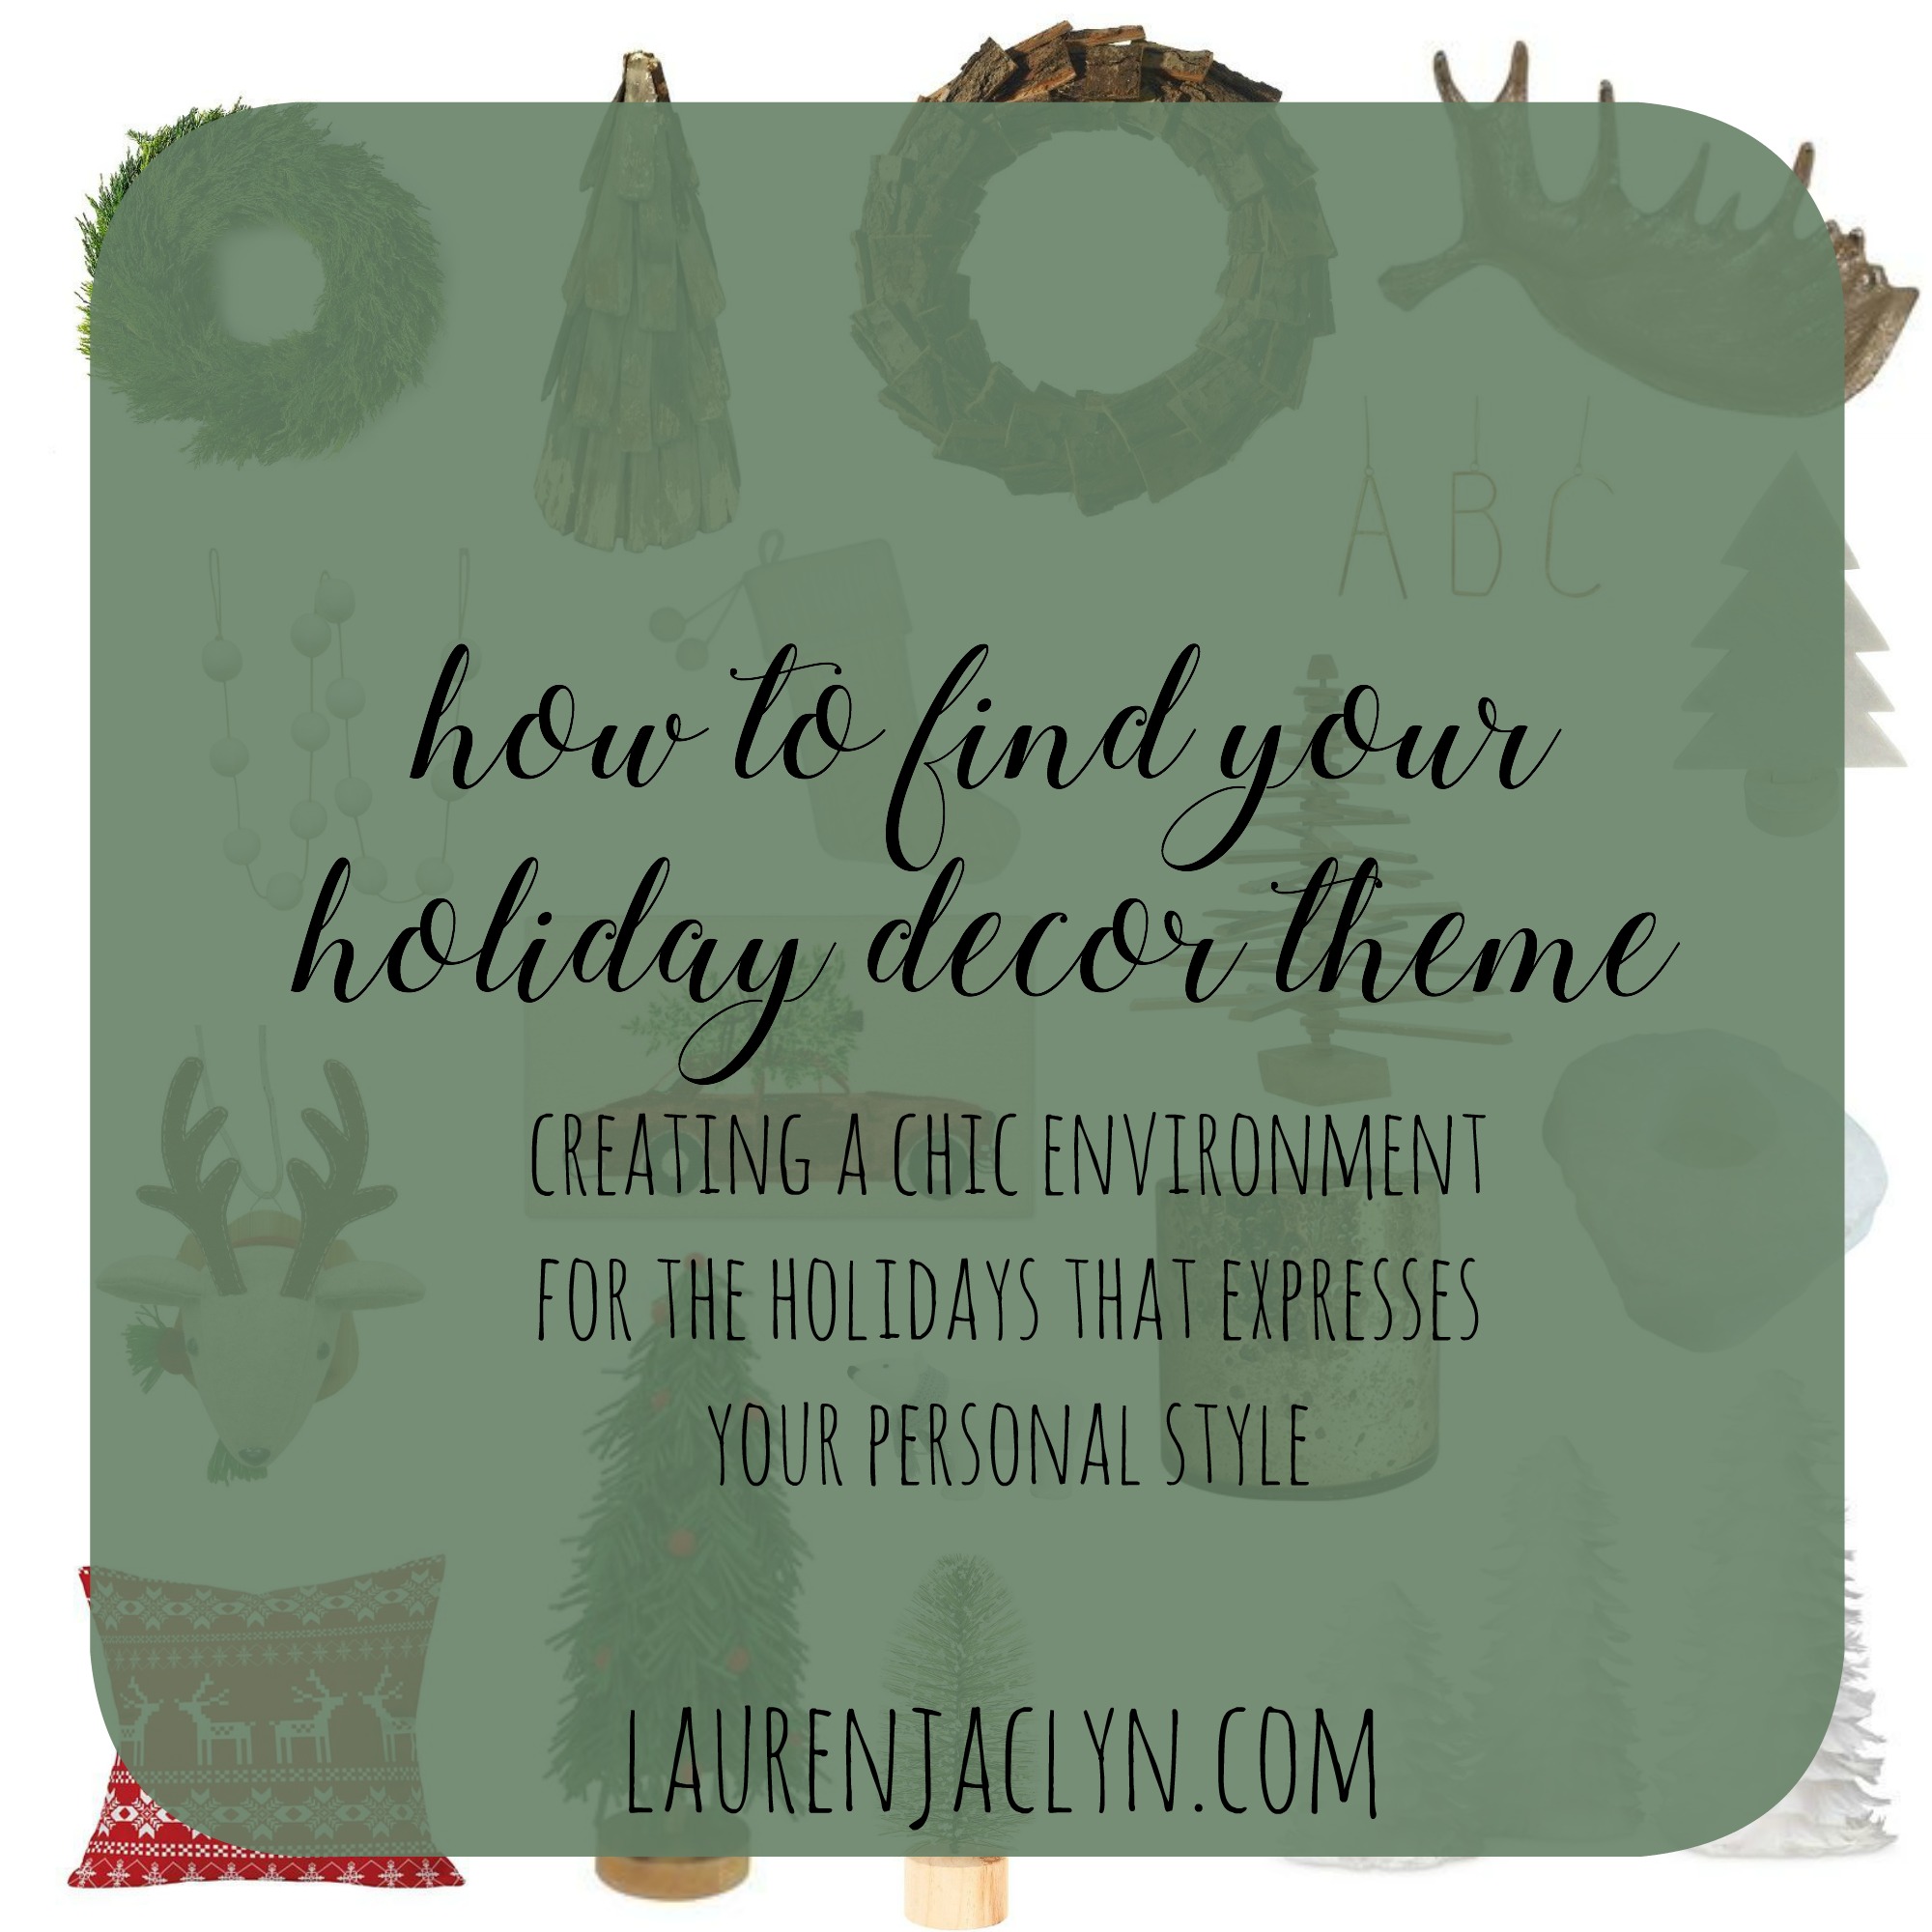 How to Find Your Holiday Decor Theme